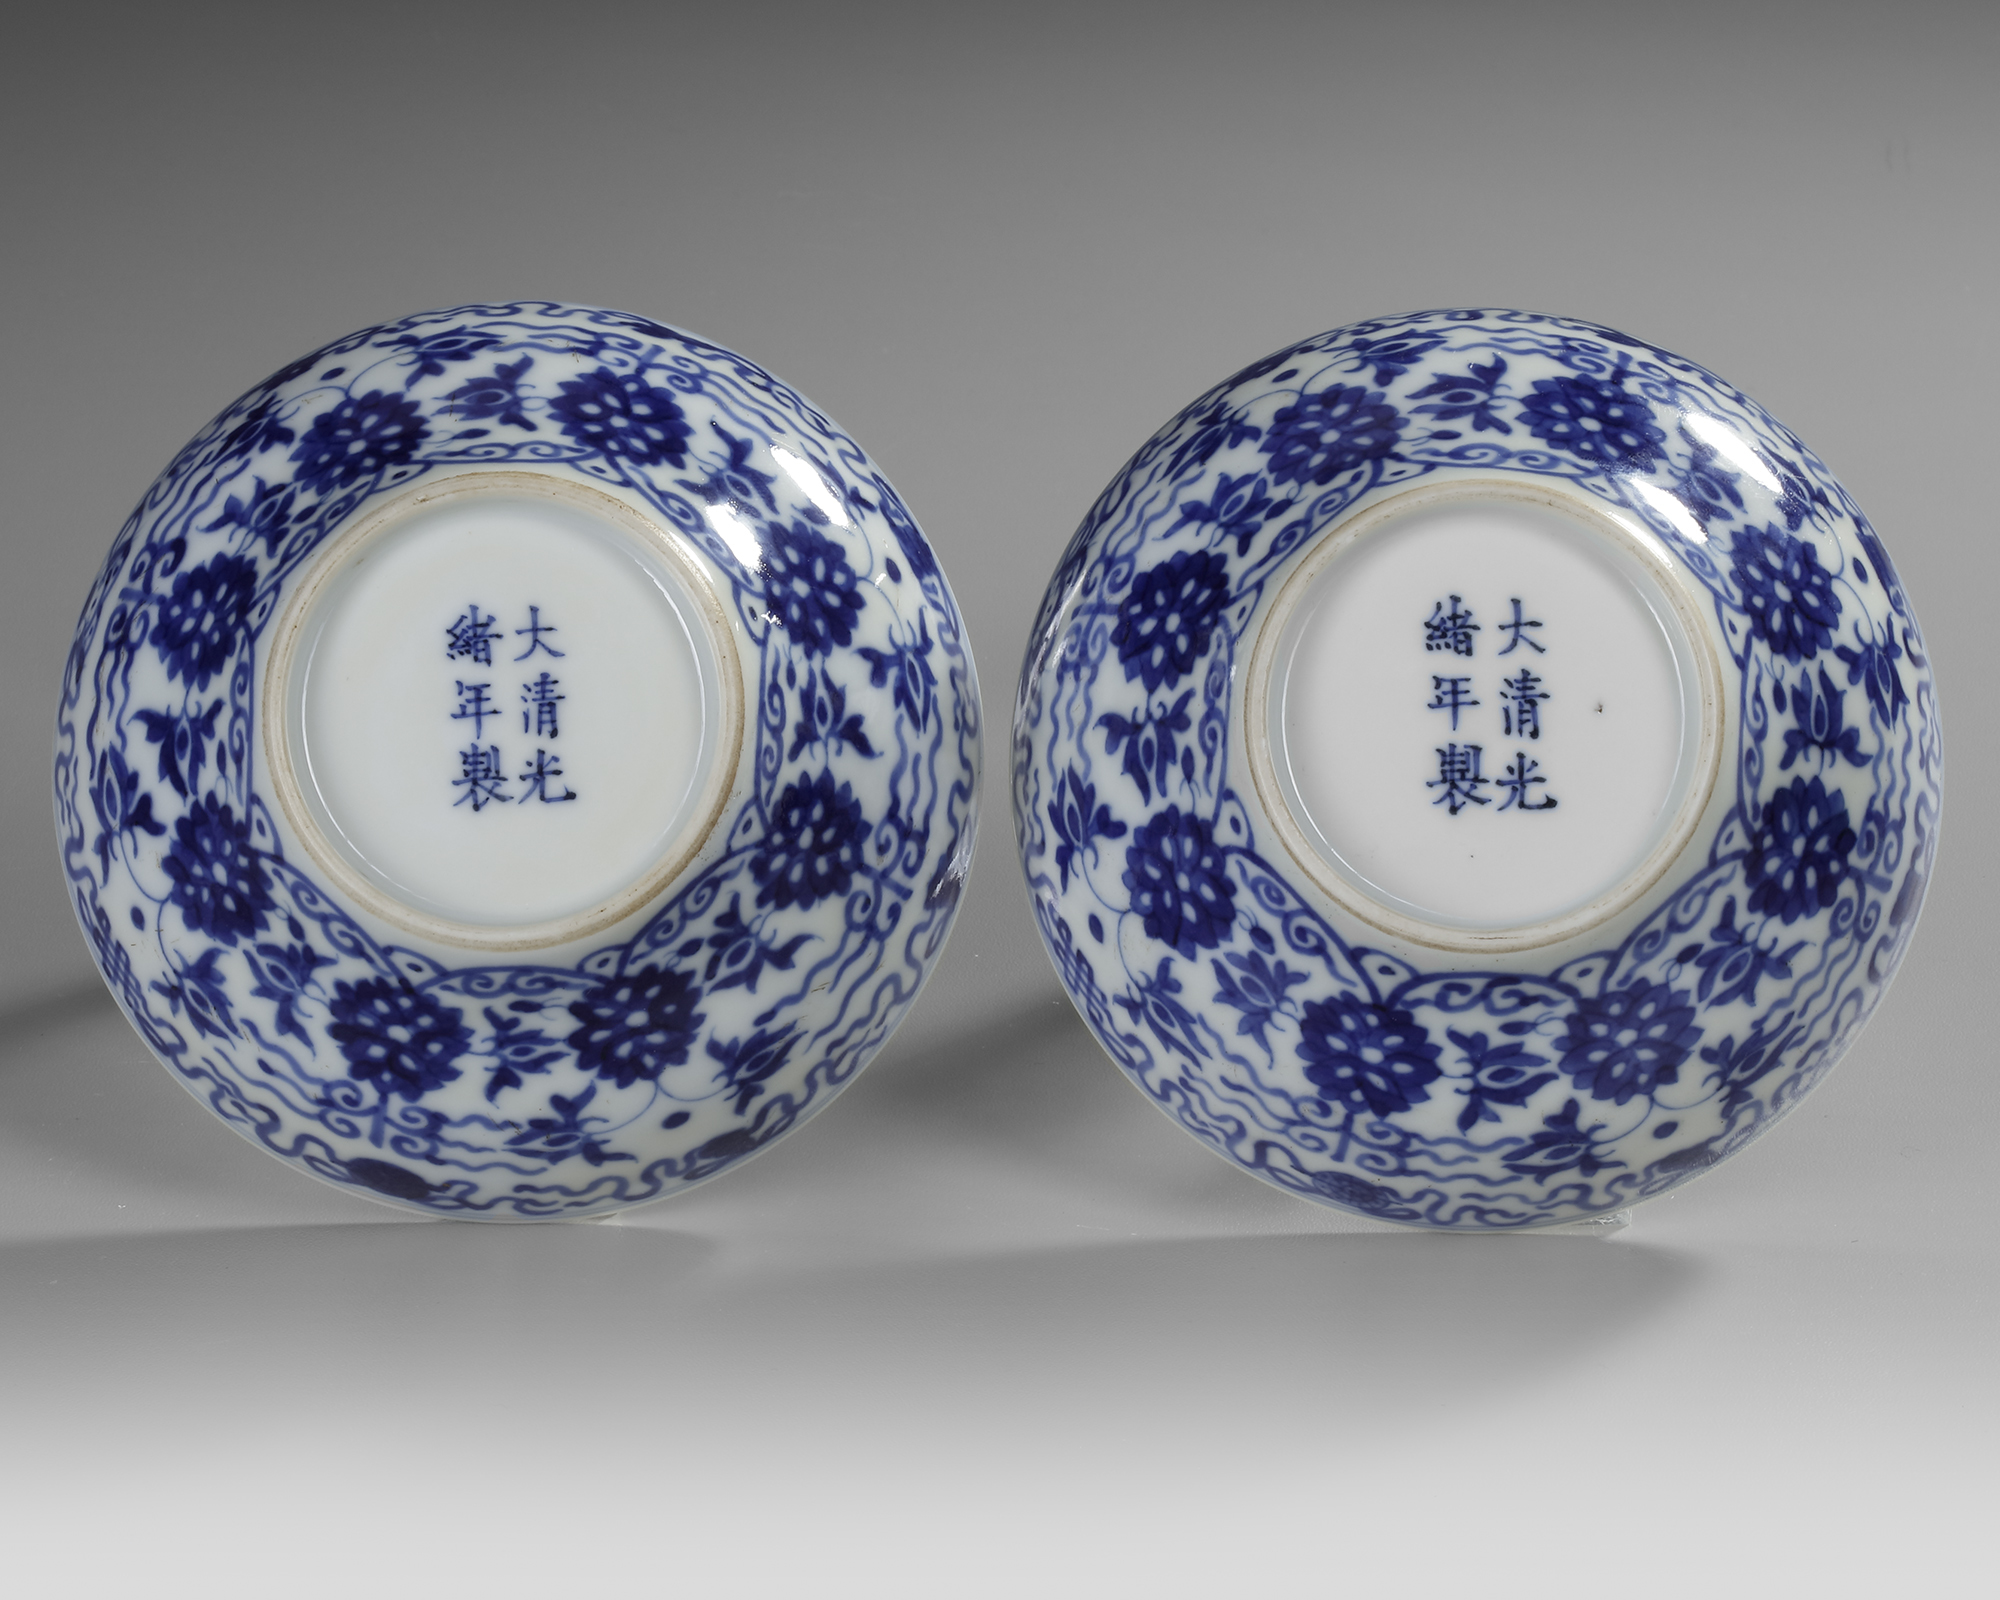 A PAIR OF CHINESE BLUE AND WHITE OGEE BOWLS, QING DYNASTY (1644–1911) - Image 3 of 4